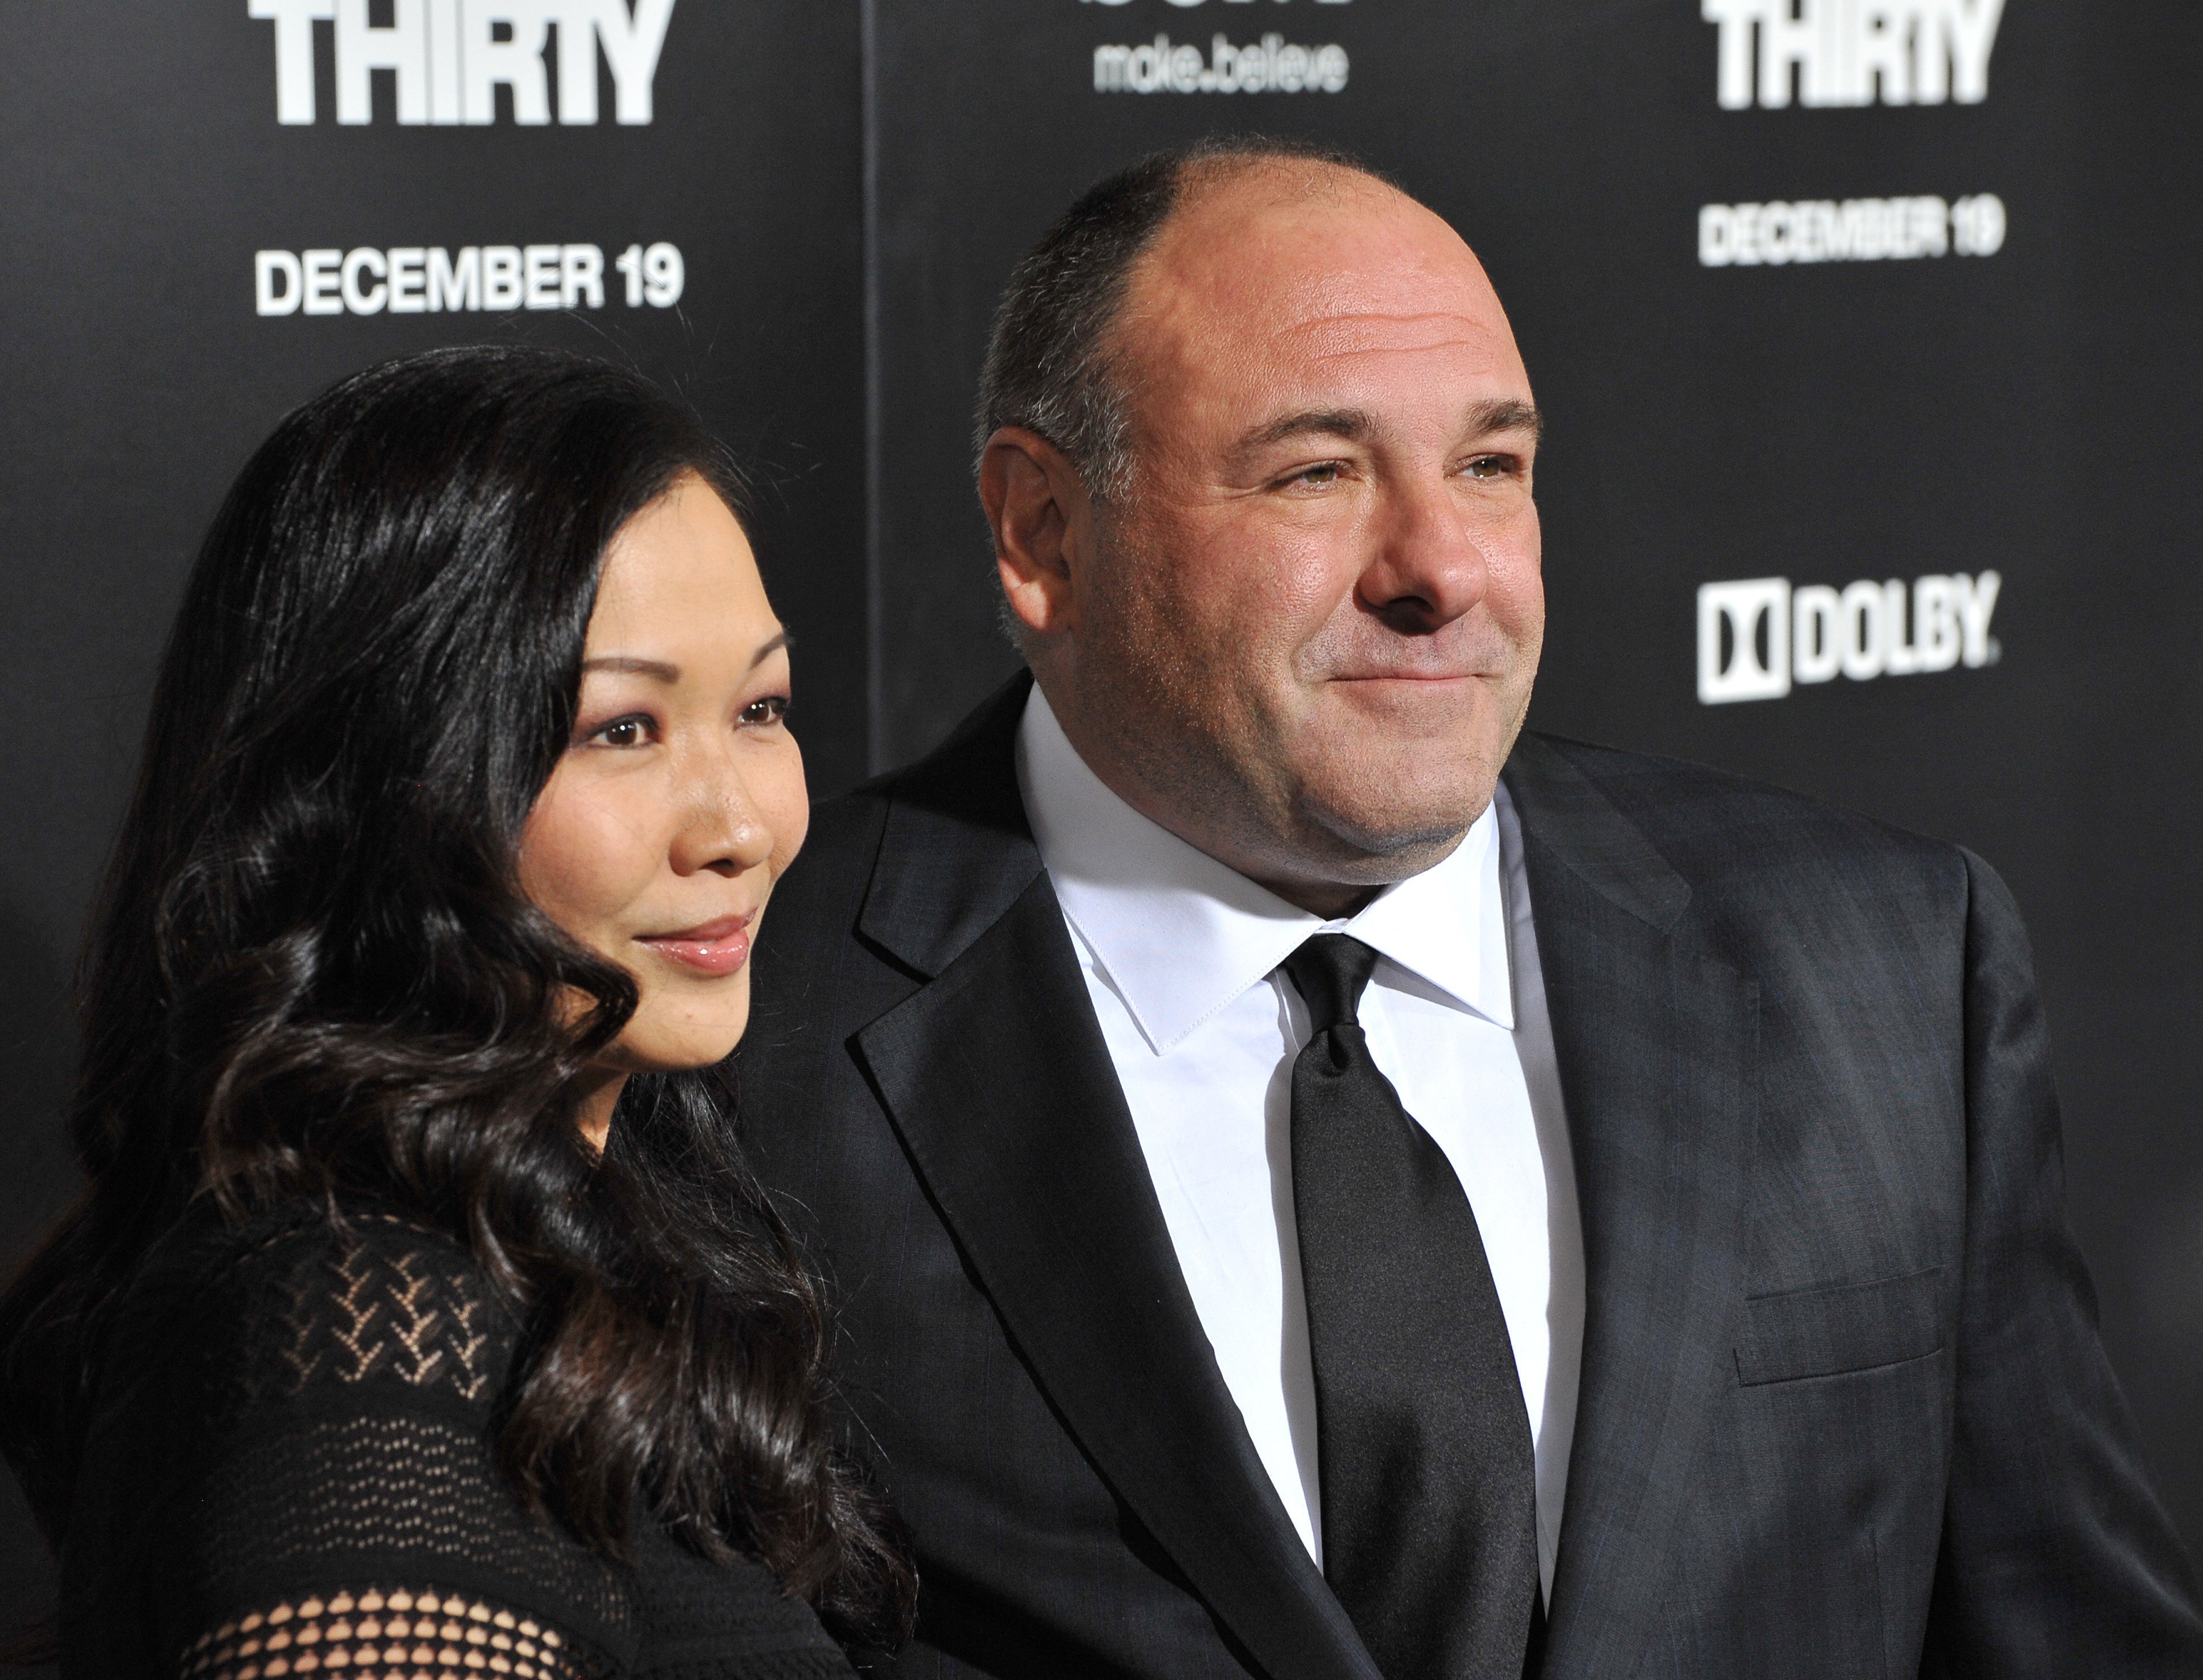 James Gandolfini and his wife, Deborah Lin, at the premiere of his movie "Zero Dark Thirty" at the Dolby Theatre, Hollywood. December 10, 2012. | Source: Paul Smith/Shutterstock